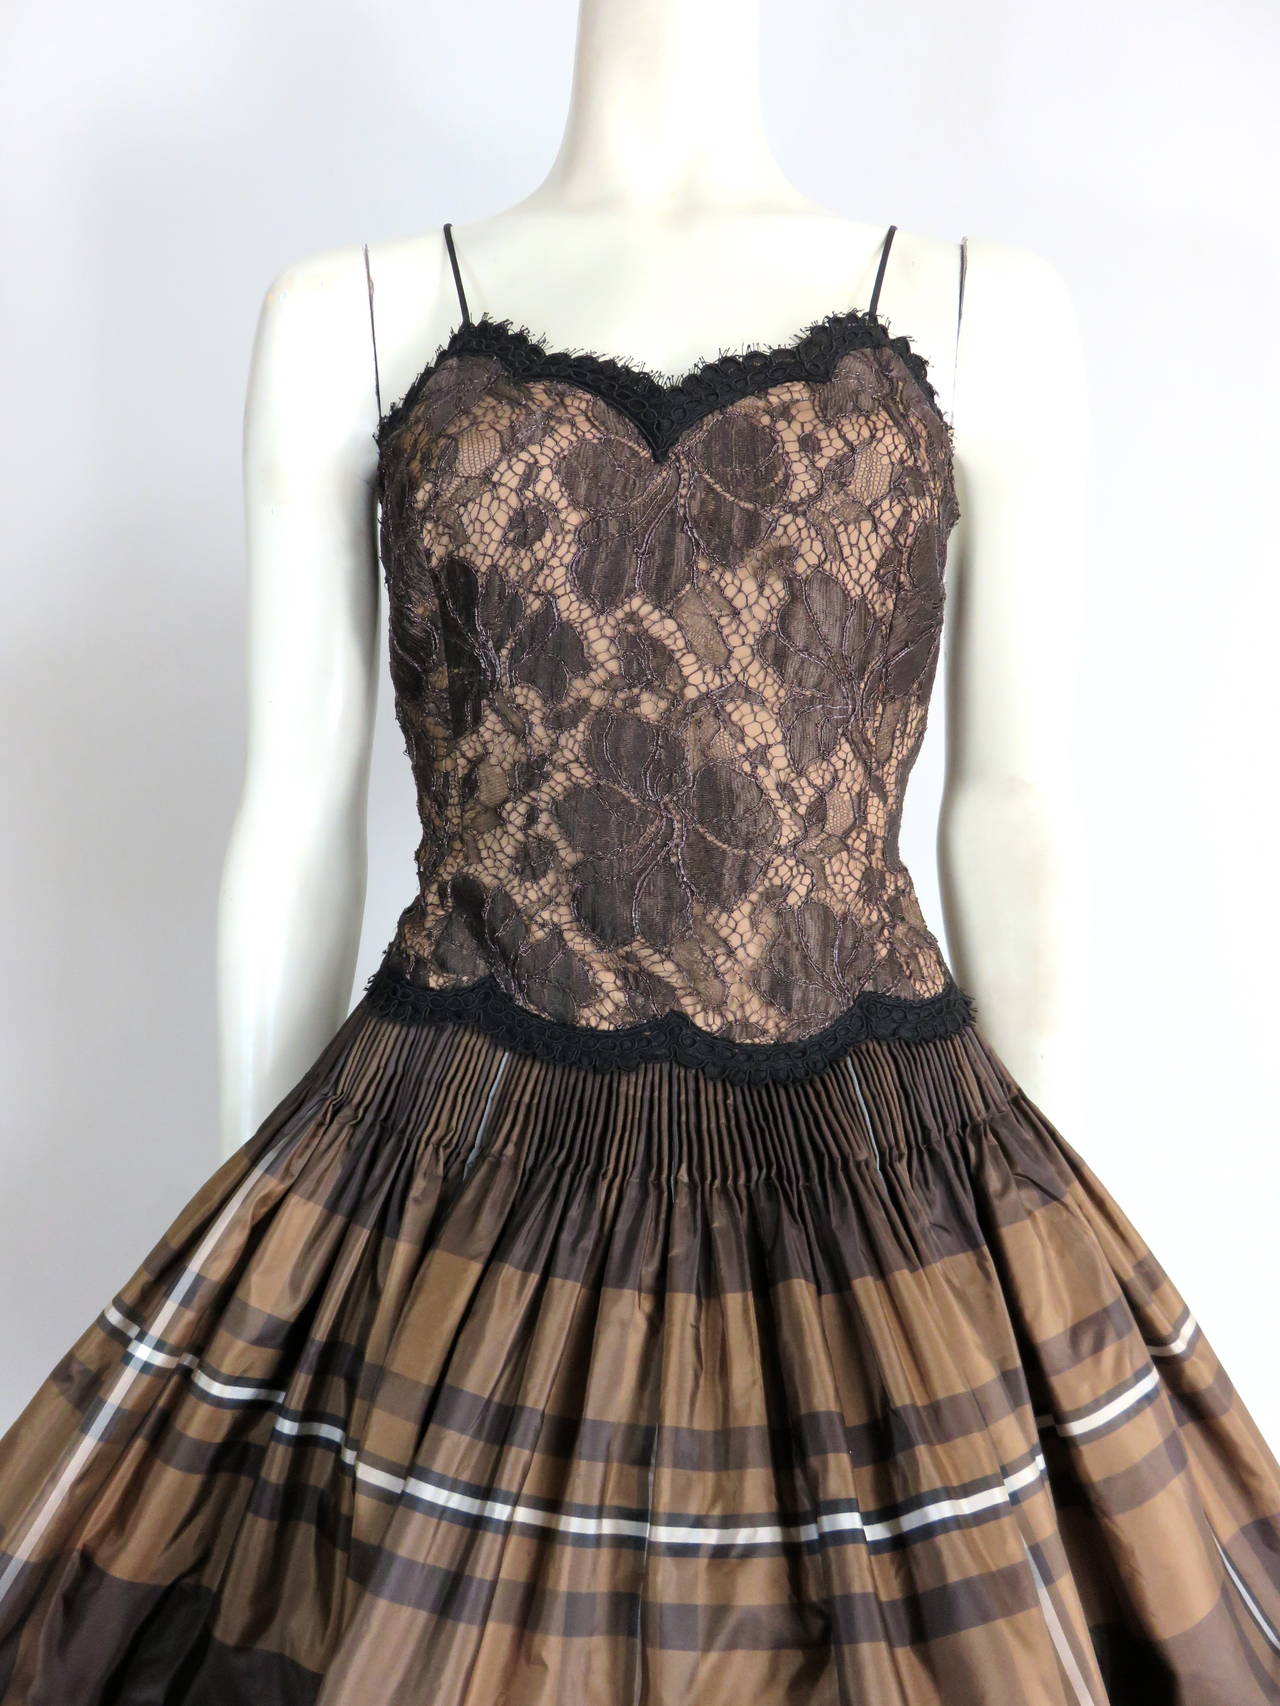 Mint condition, 1980's GEOFFREY BEENE Lace & taffeta cocktail dress.

Gorgeous floral lace bodice made of dark pewter, and bronze toned threads.  The bodice gives off a very subtle shimmer when reflected in the light, and is intricately